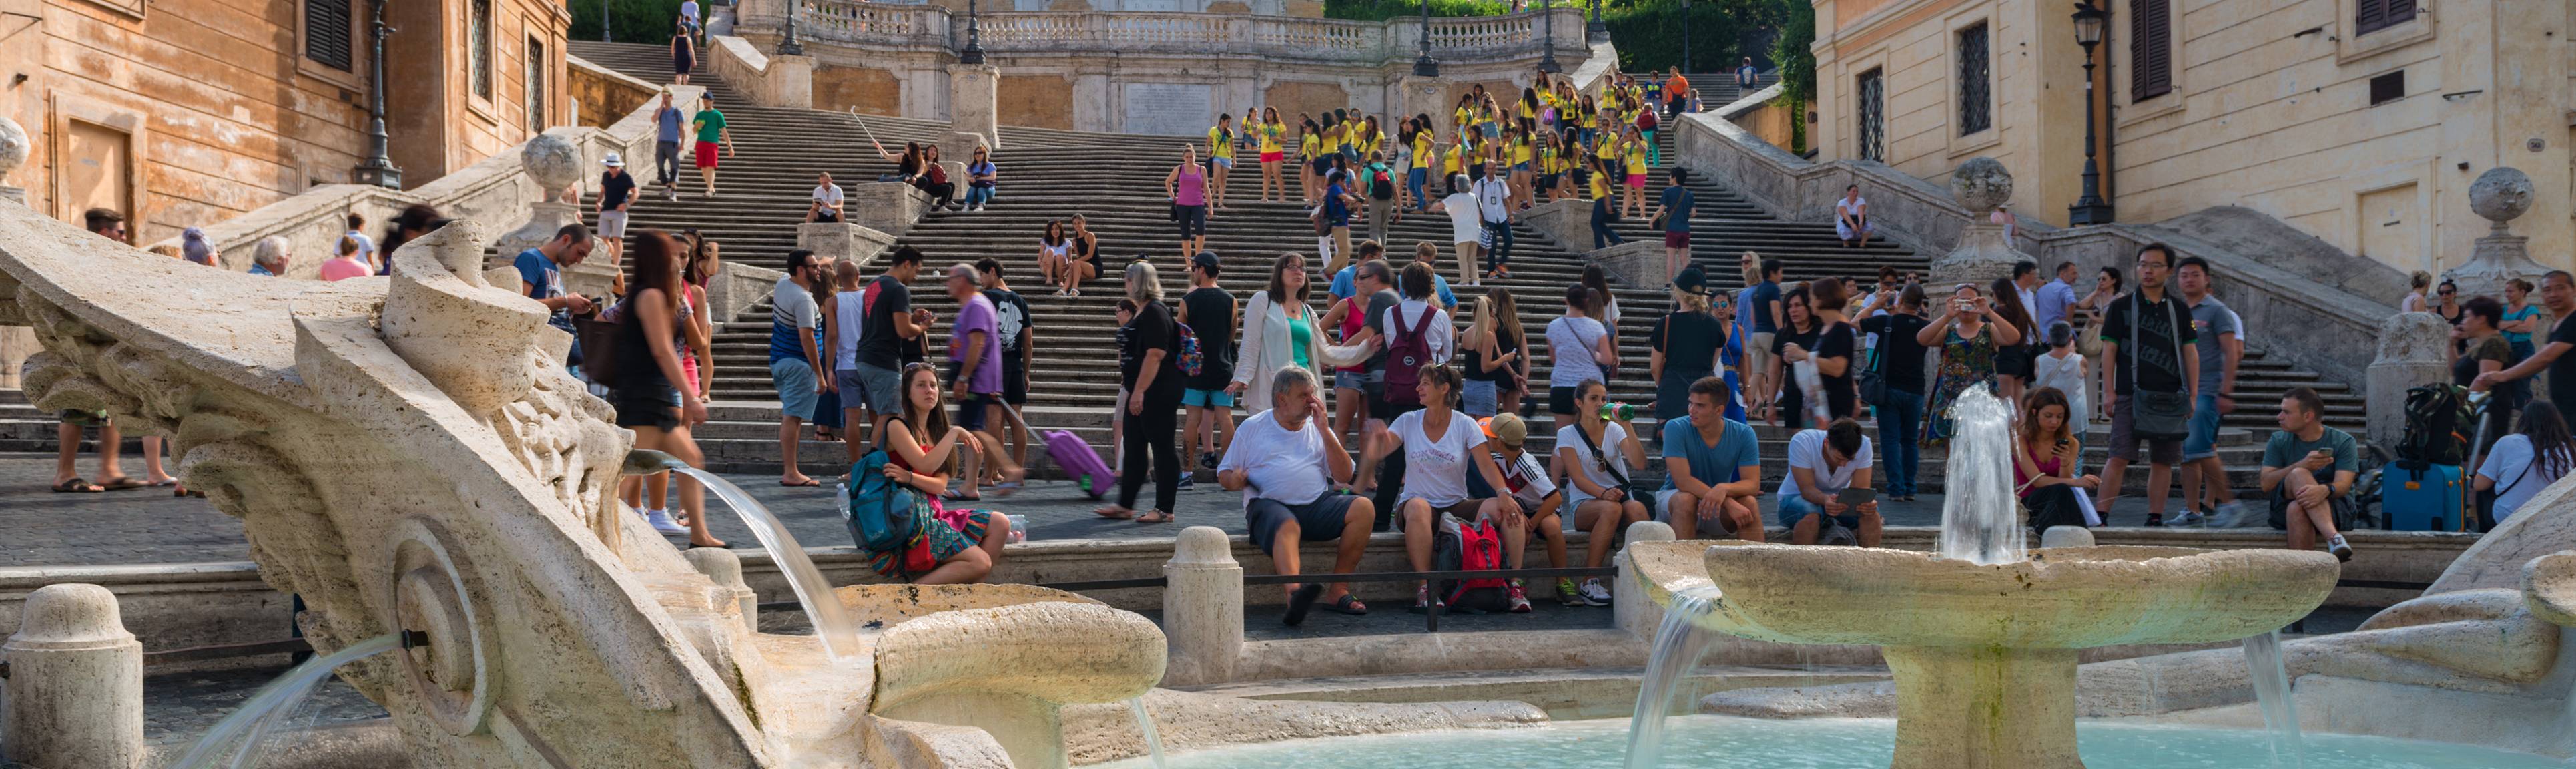 Visitors resting on the Spanish Steps in Rome